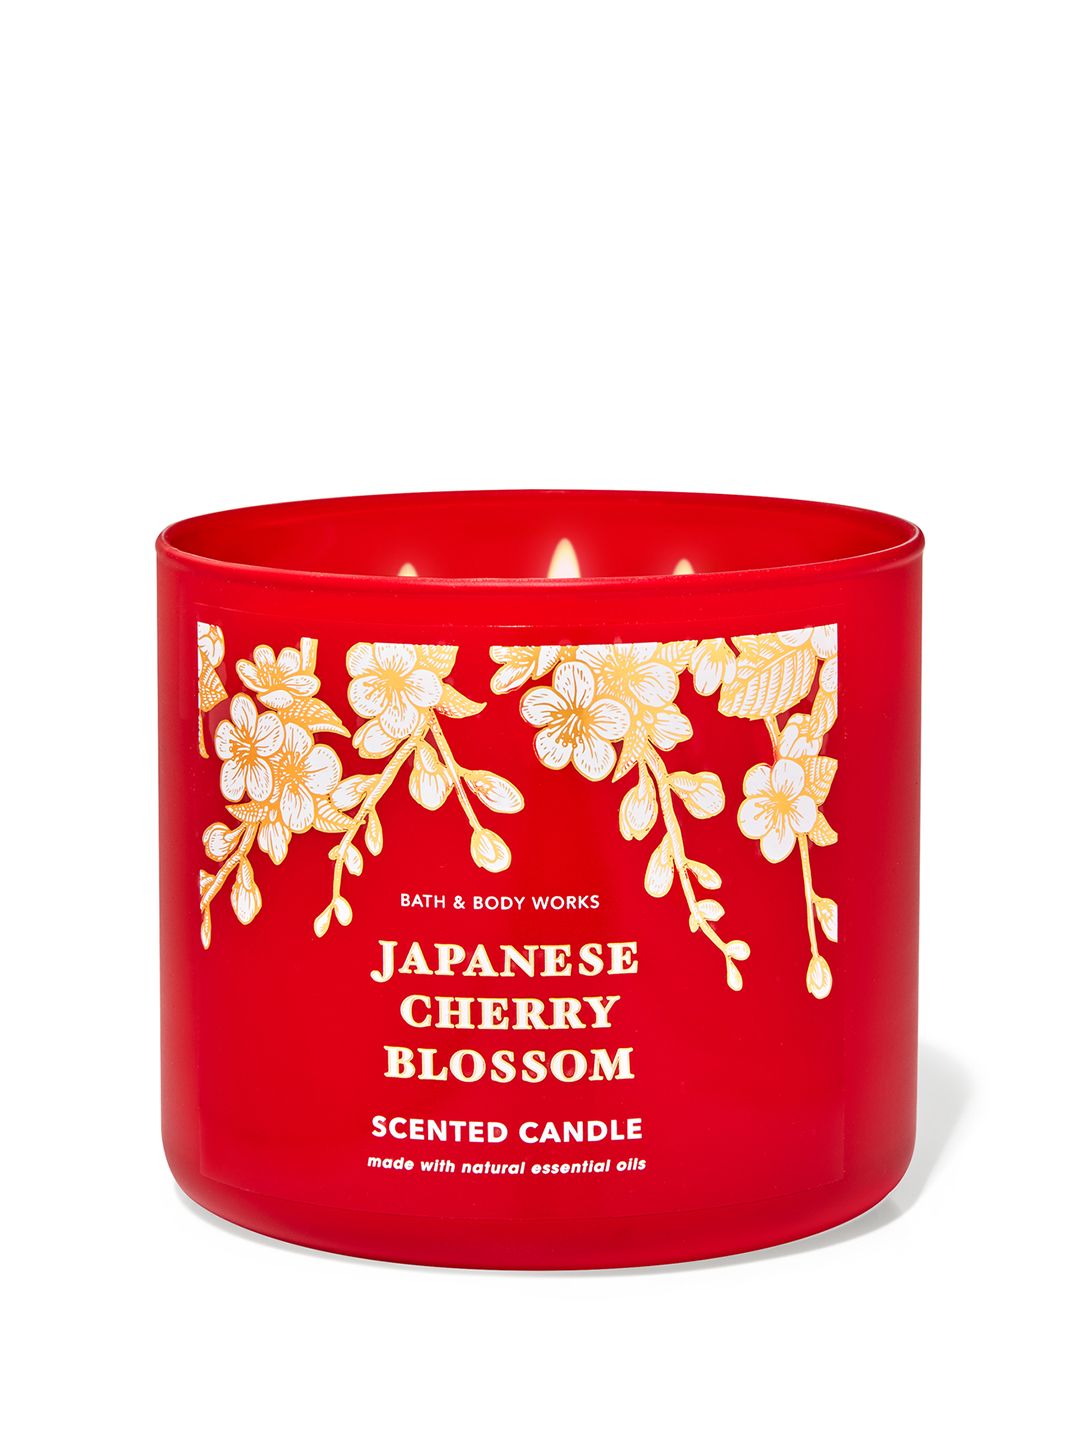 Bath & Body Works Japanese Cherry Blossom 3-Wick Scented Candle with Essential Oils - 411g Price in India